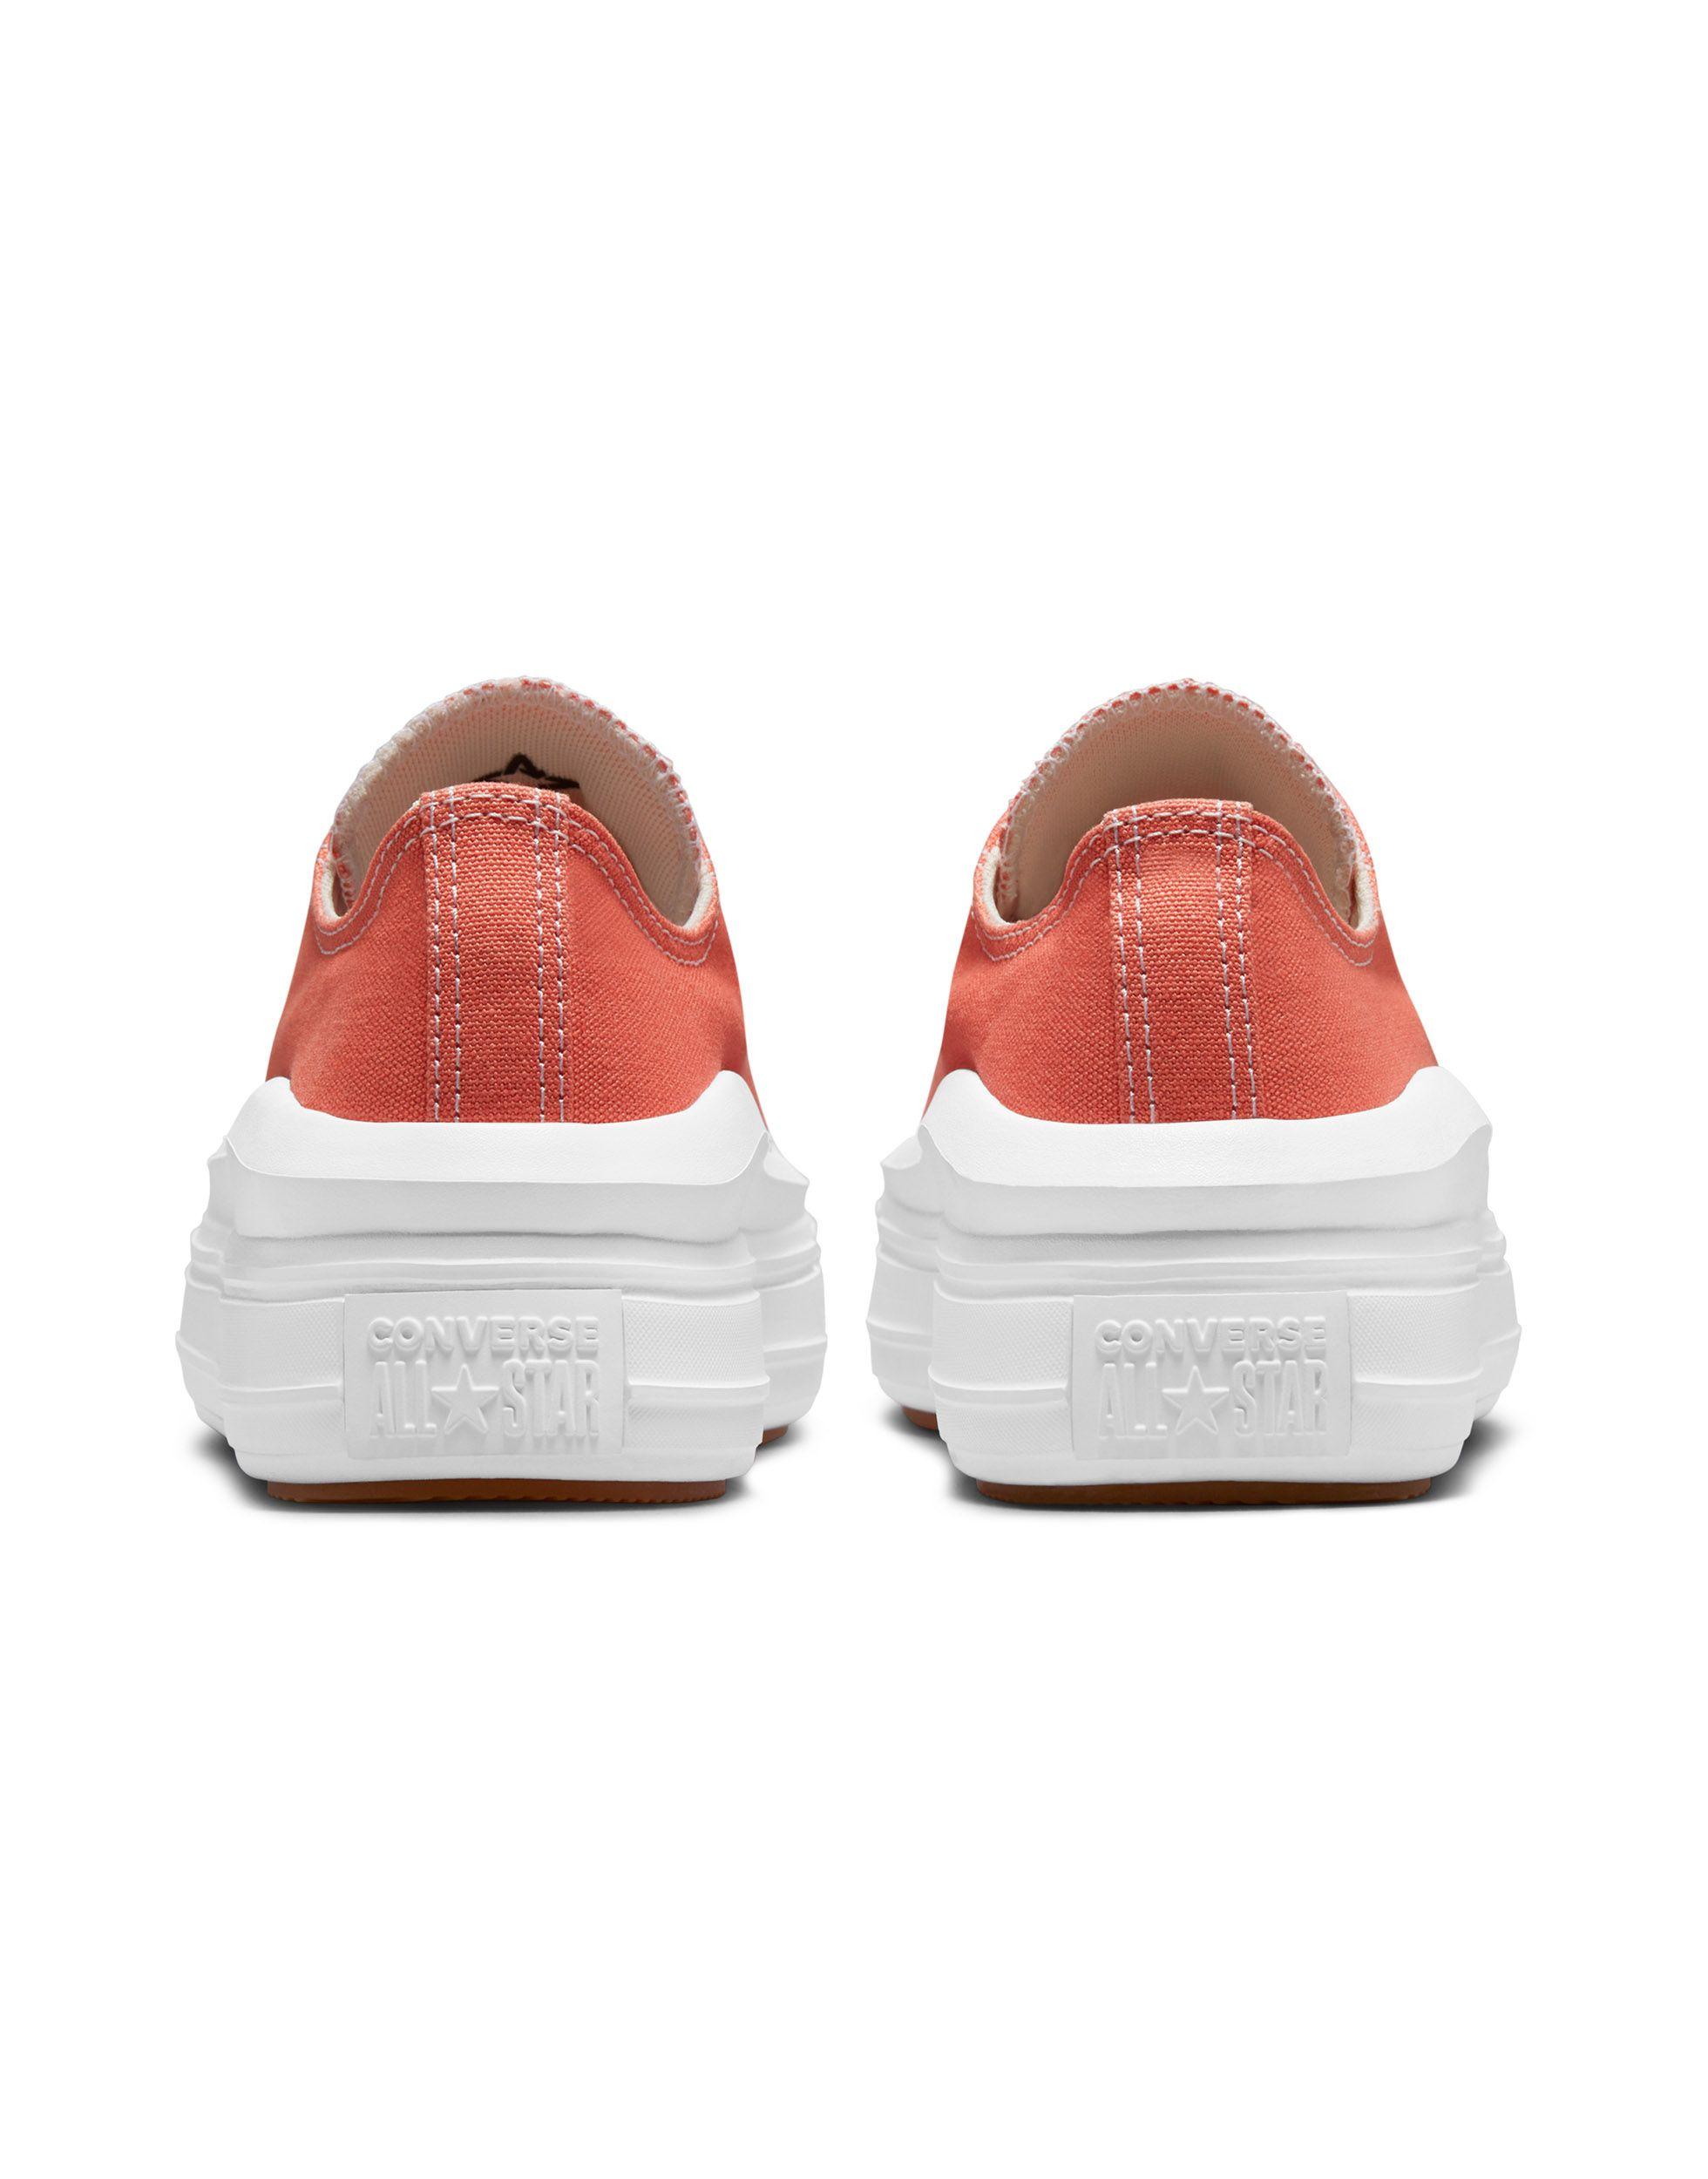 Pastor th Maryanne Jones Converse Chuck Taylor All Star Ox Move Canvas Platform Sneakers in Orange |  Lyst